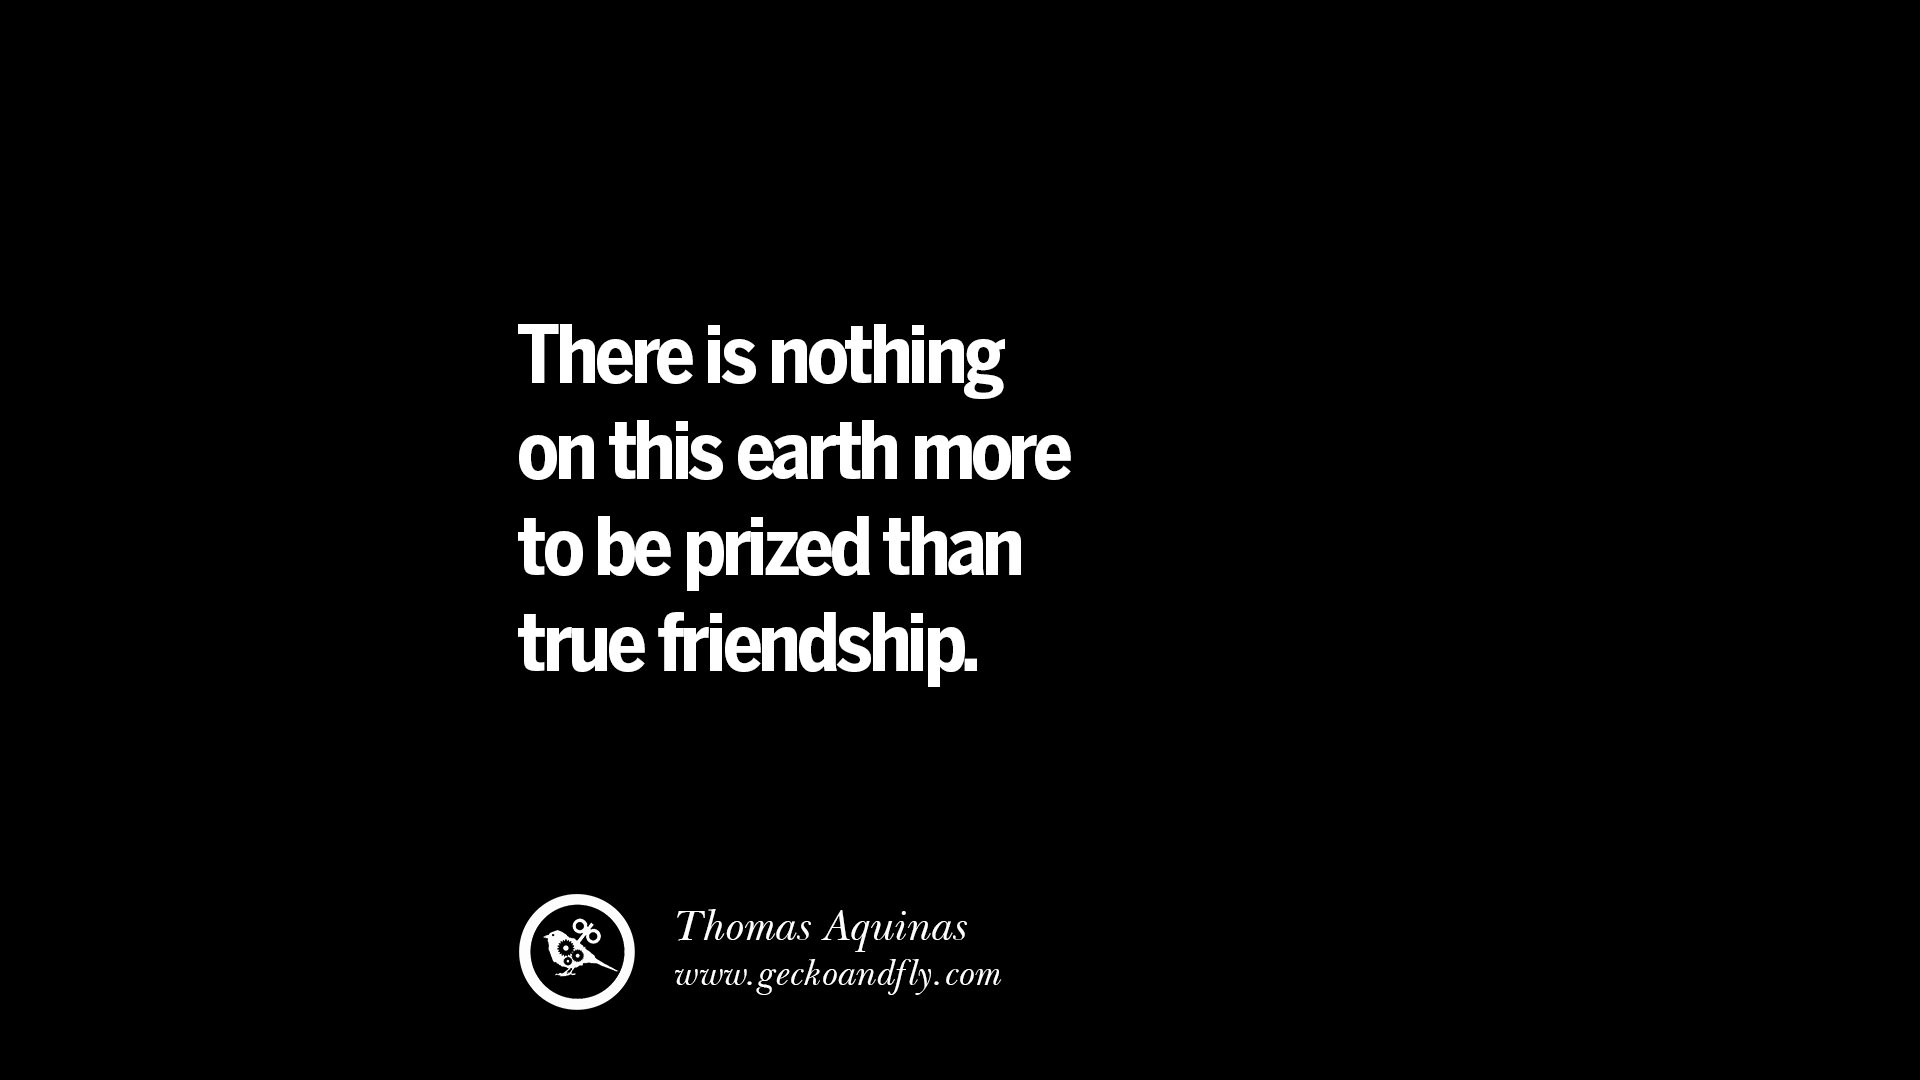 quotes-about-friendship-love-friends3.jpg (1920×1080)